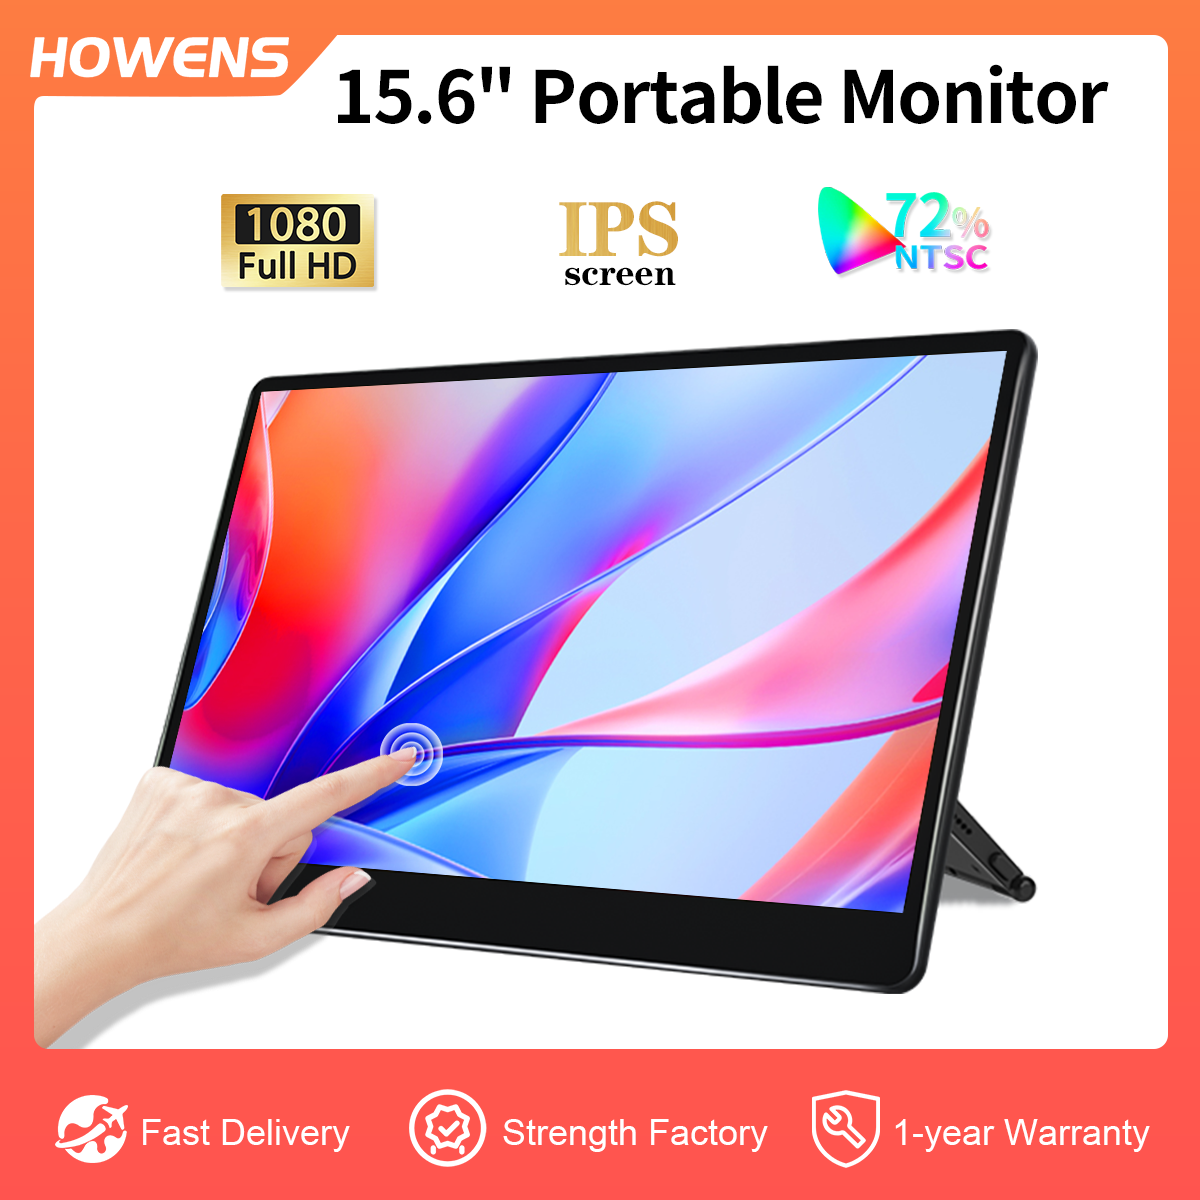 Portable Monitor for Daily Work or Game Scene Display/15.6 Inch Super-responsive Touchscreen/with Rotatable Bracket/HDMI,2 Type-C and USB Ports